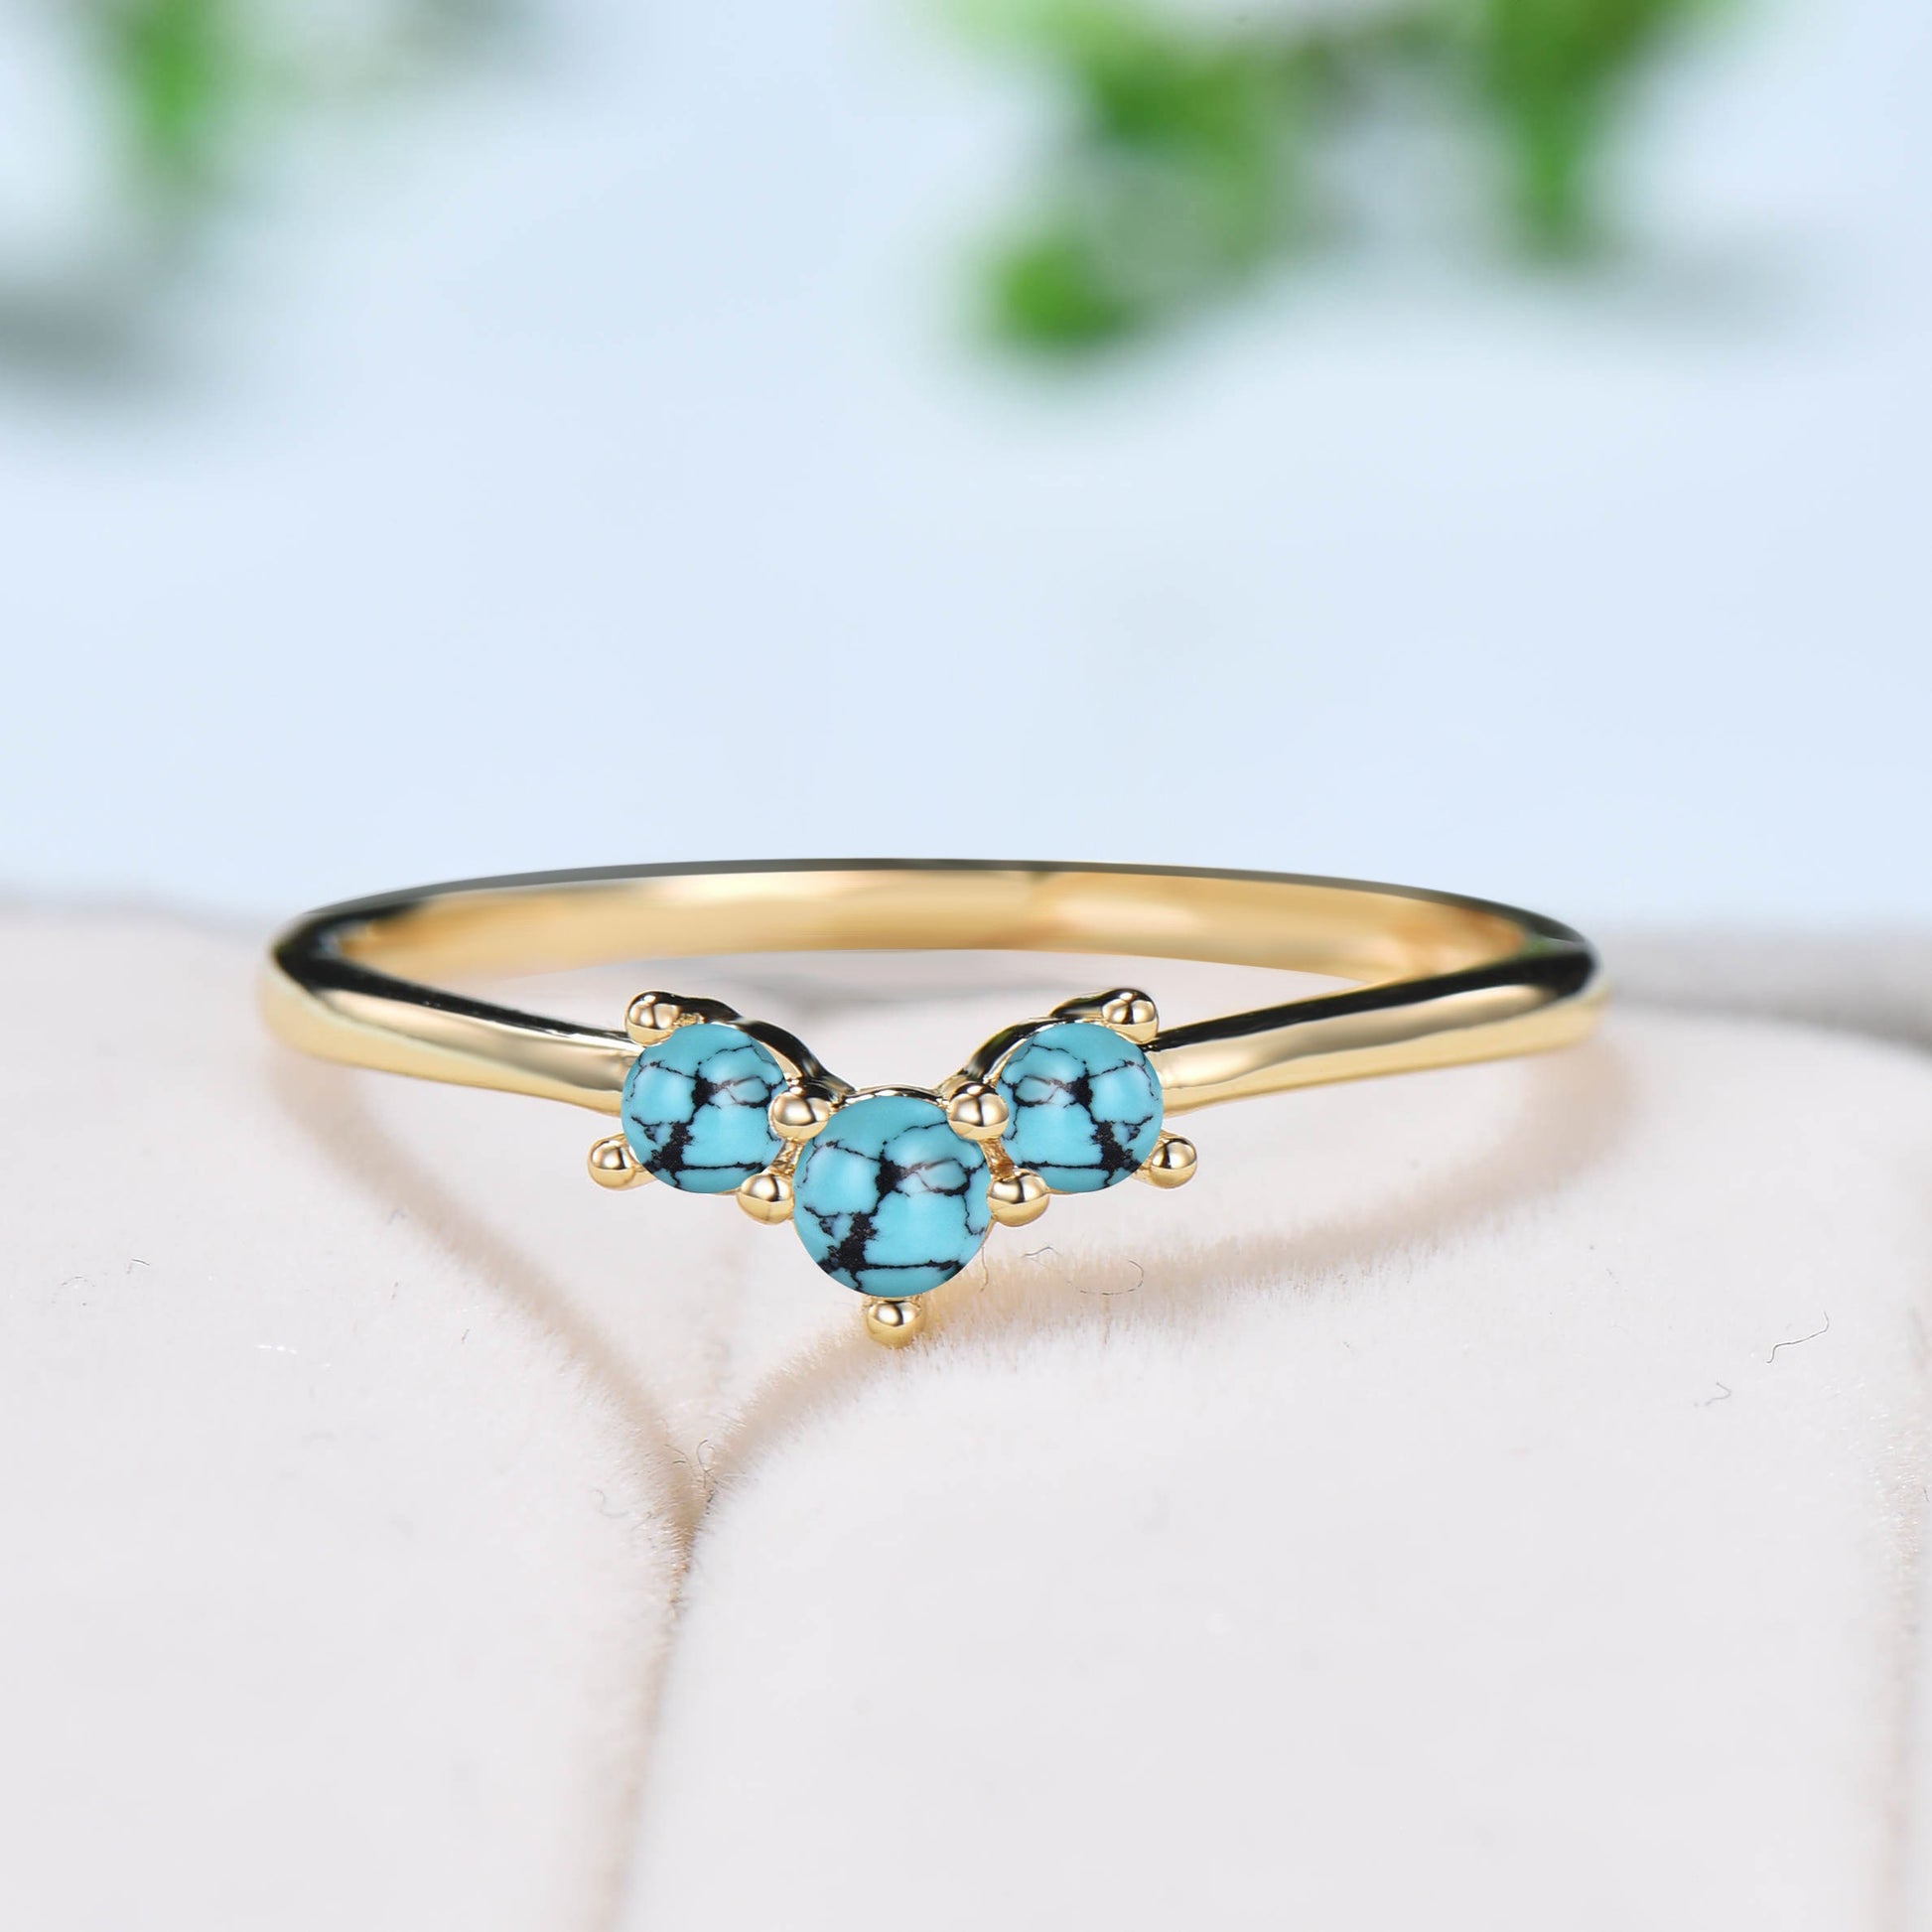 Dainty Turquoise wedding band three stone stacking ring minimalist turquoise wedding ring for women anniversary gift promise band for wife - PENFINE